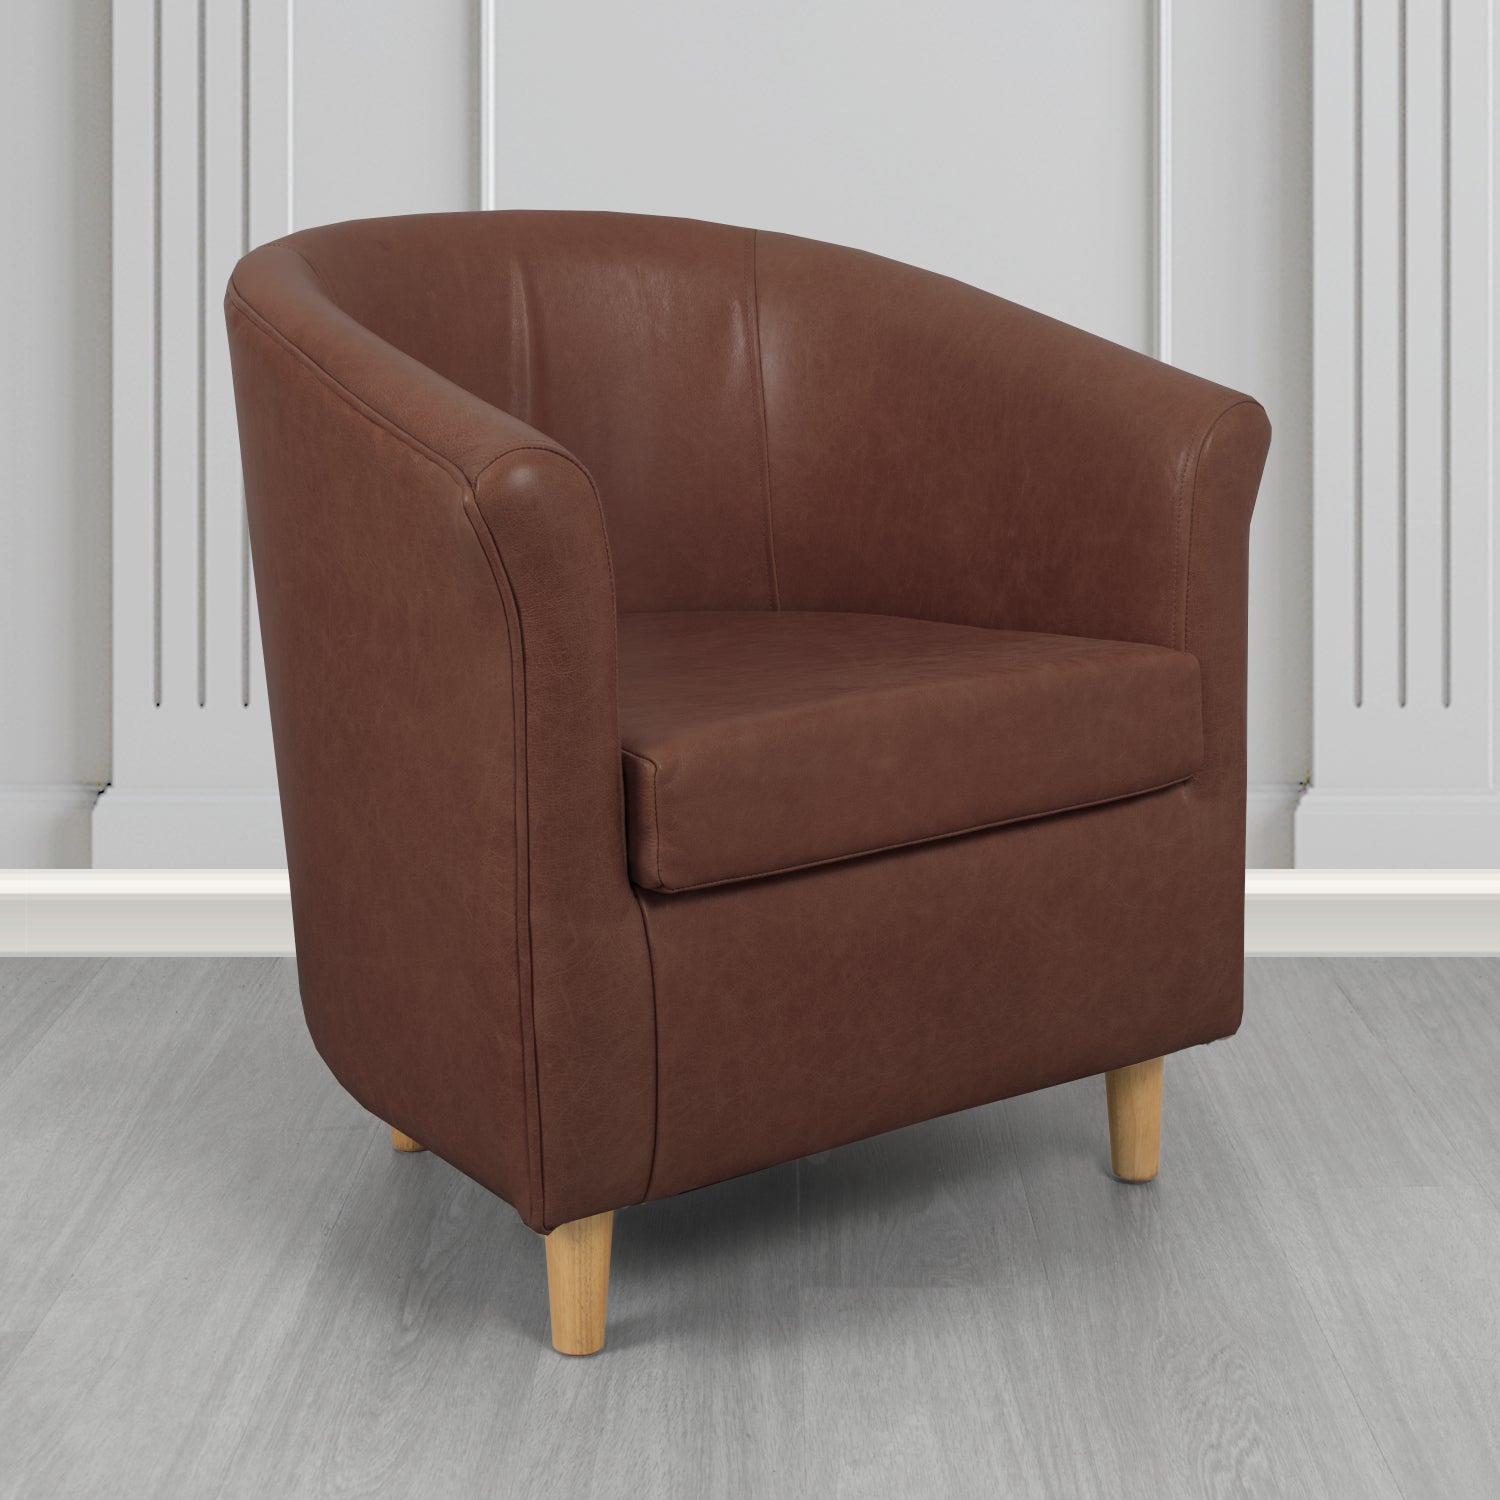 Tuscany Tub Chair in Crib 5 Old English Red Brown Genuine Leather - The Tub Chair Shop